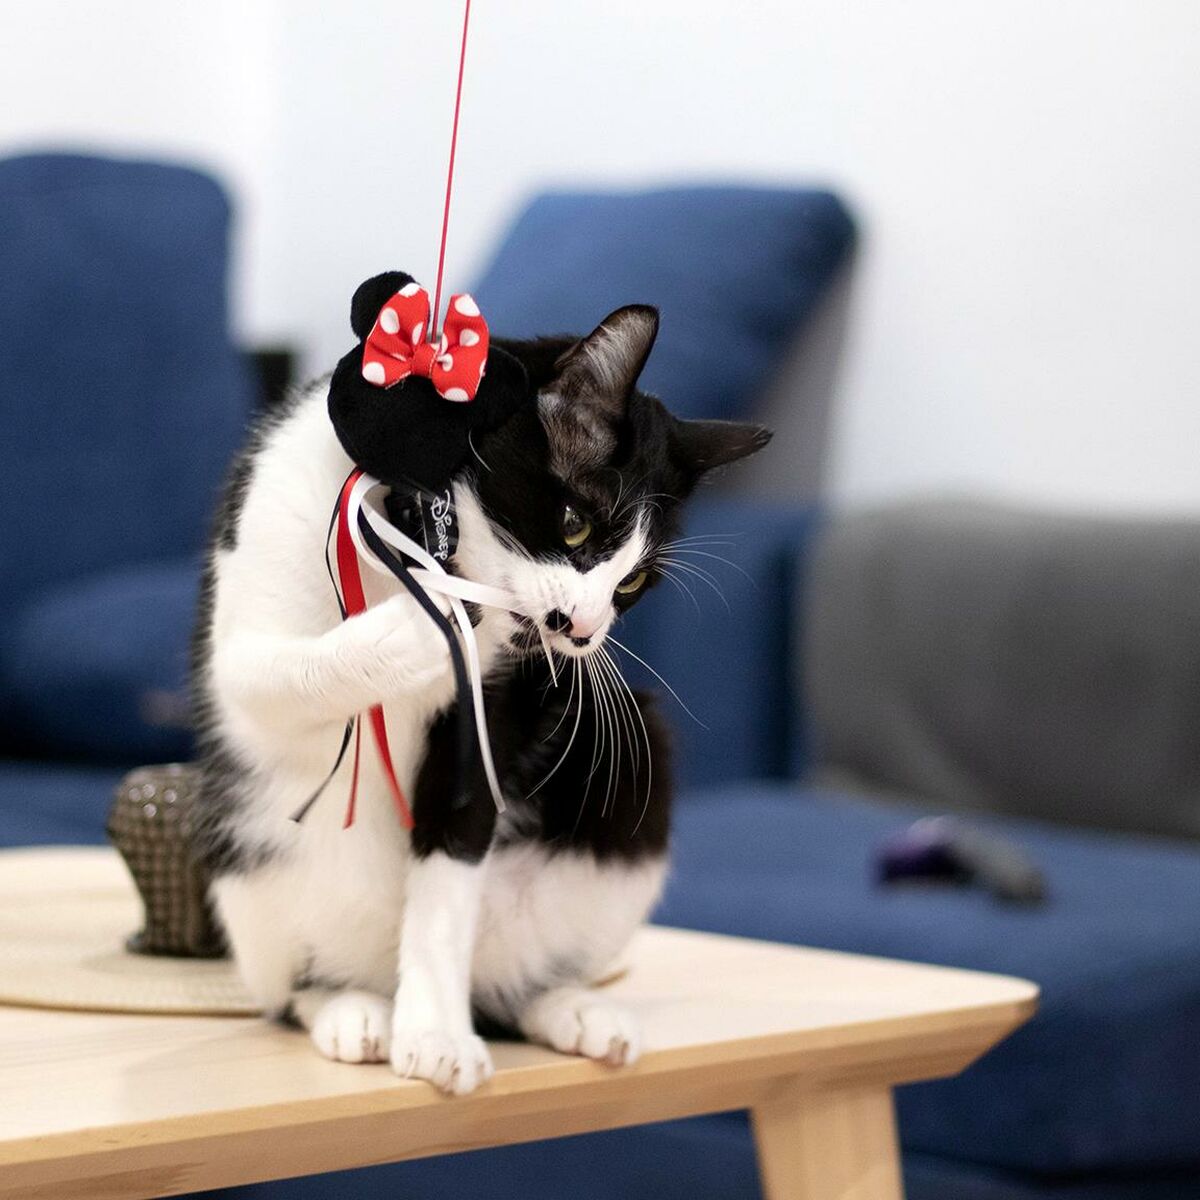 Cat toy Minnie Mouse Black